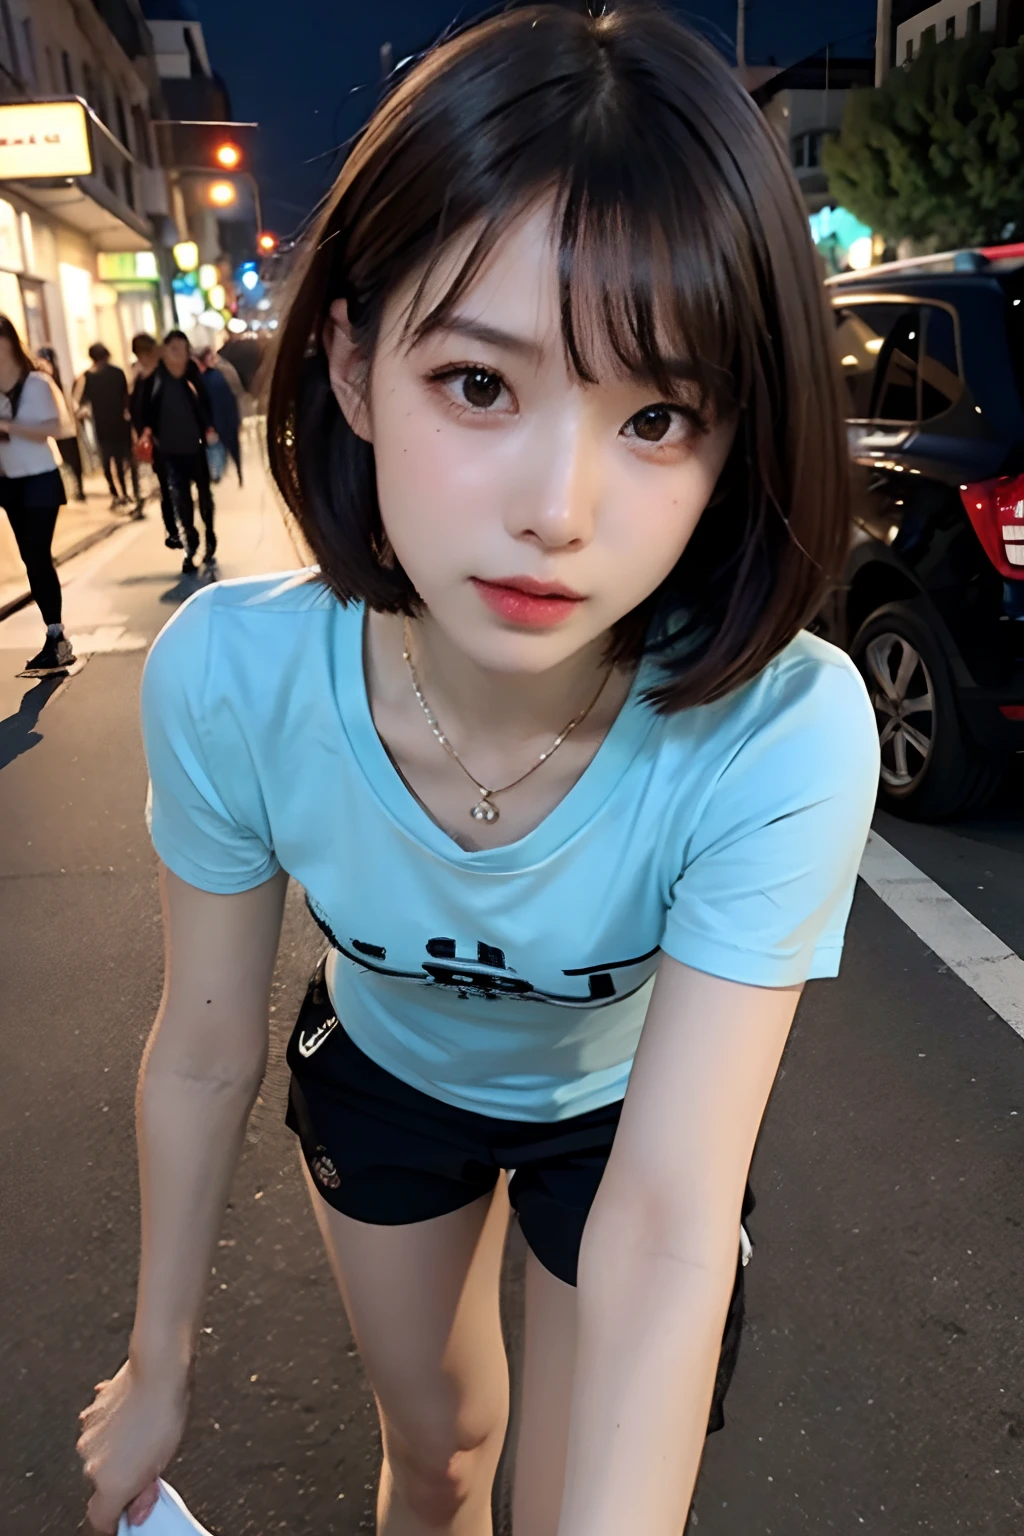 top-quality、​masterpiece、超A high resolution、(realisitic:1.4)、the panorama、portlate、Very wide lens、a closeup、Beautiful adult woman、Beautiful detail eyes and skin、ssmile、Light brown short-cut hair、Small necklace、Dark short sleeve T-shirt、Training shorts、city street at night、Nights with few people、Walking、